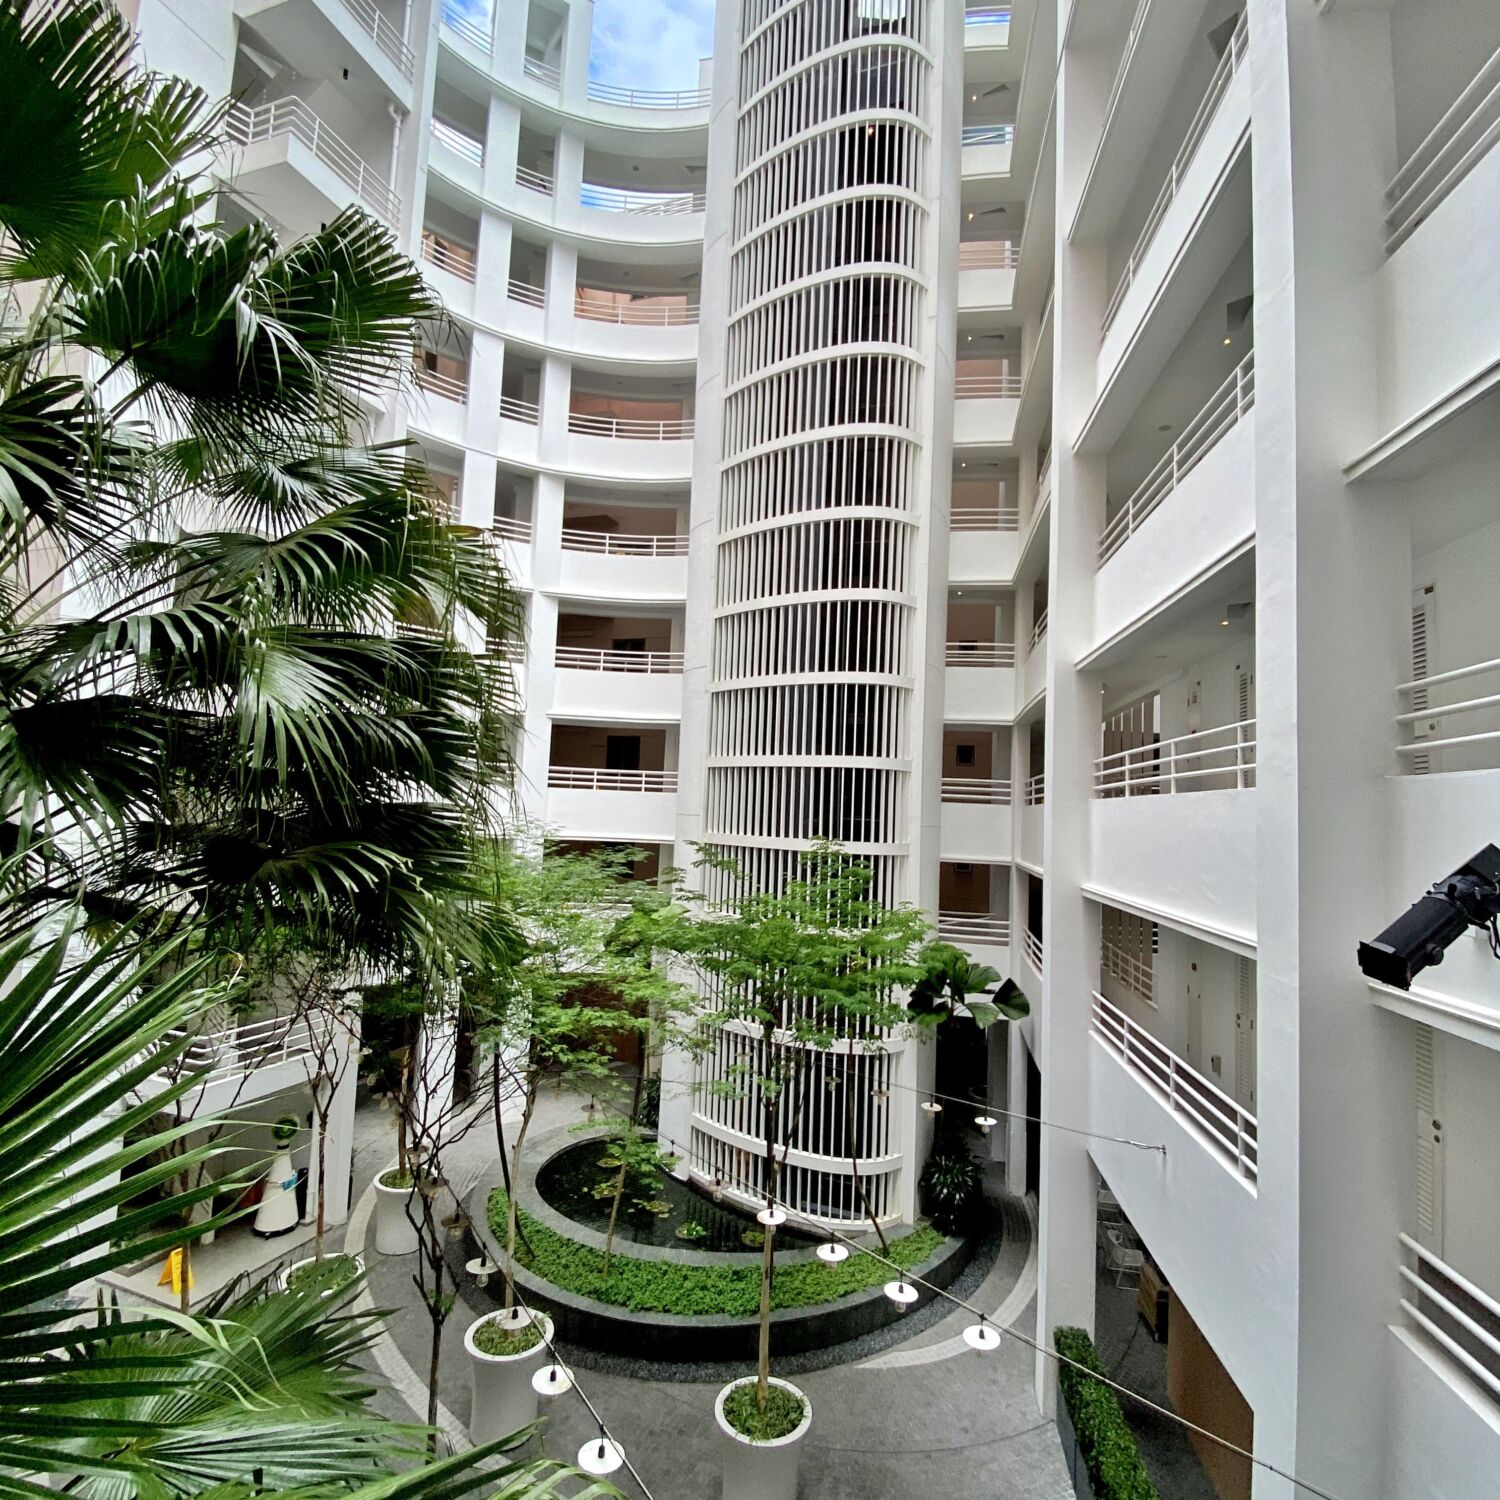 Winsland Serviced Suites by Lanson Place Interior View